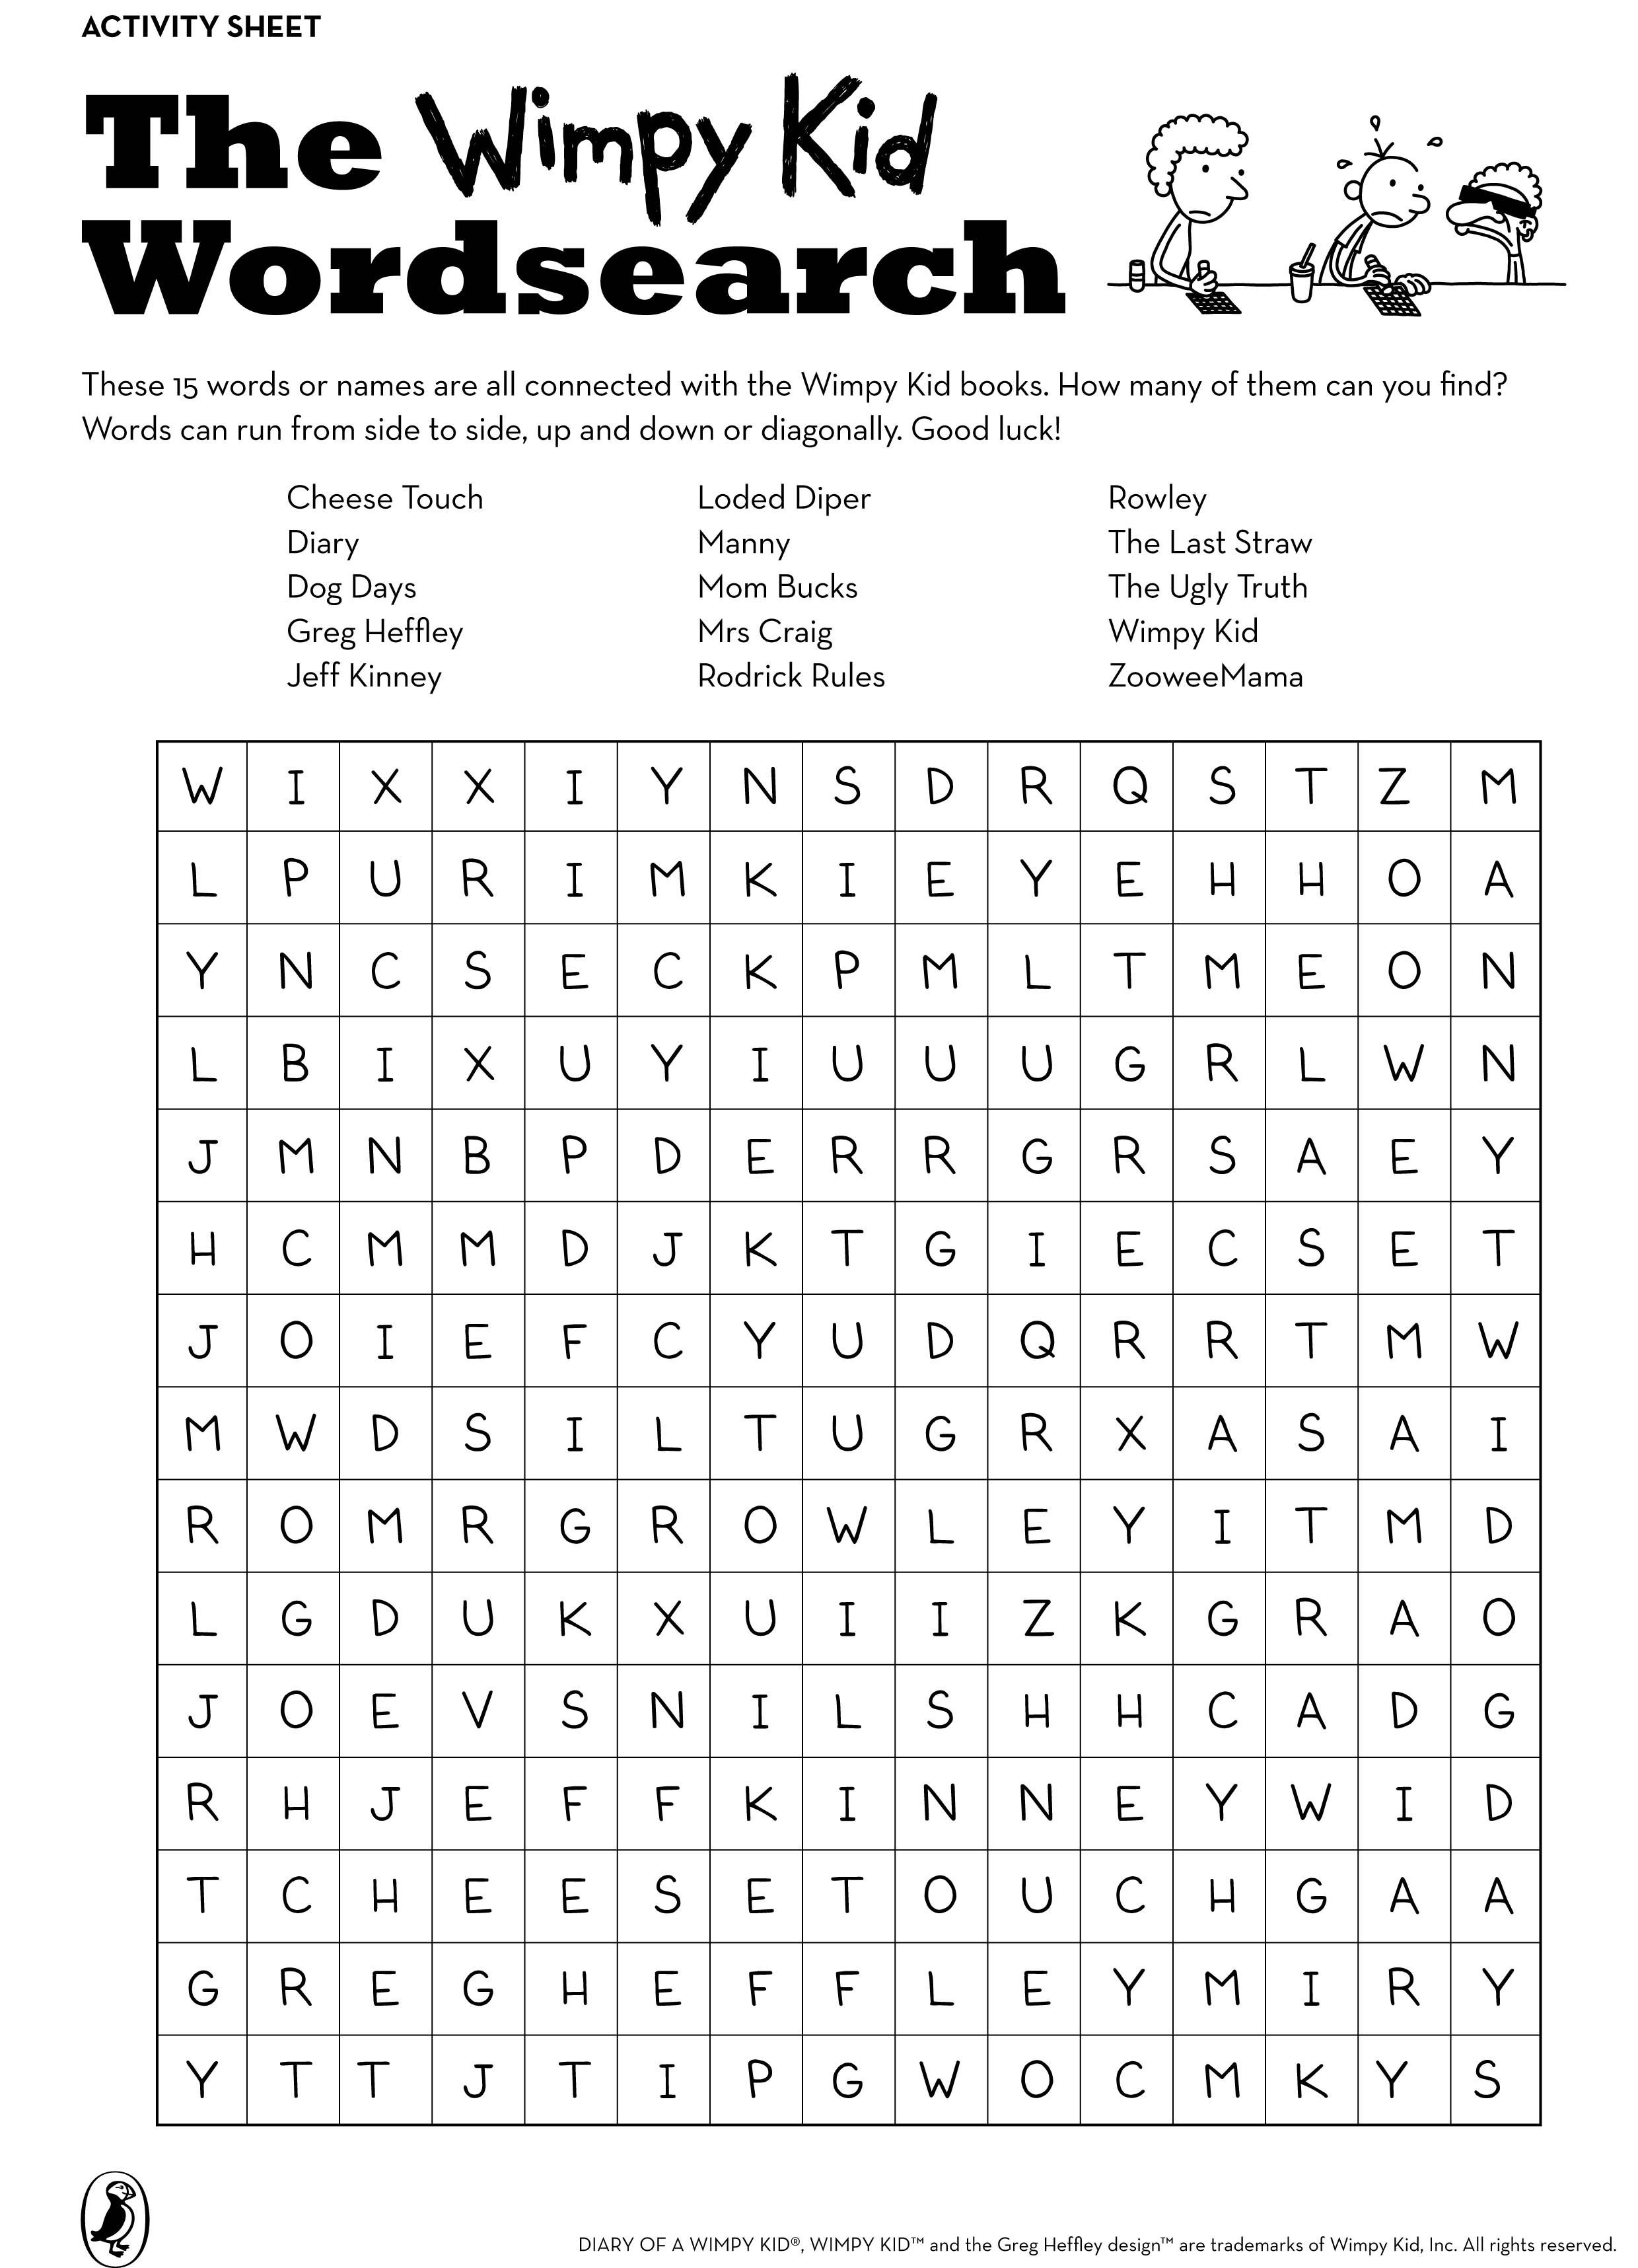 Wimpy Kid Wordsearch | Diary Of A Wimpy Kid | Kids Word Search - Free Printable Word Searches For Kids